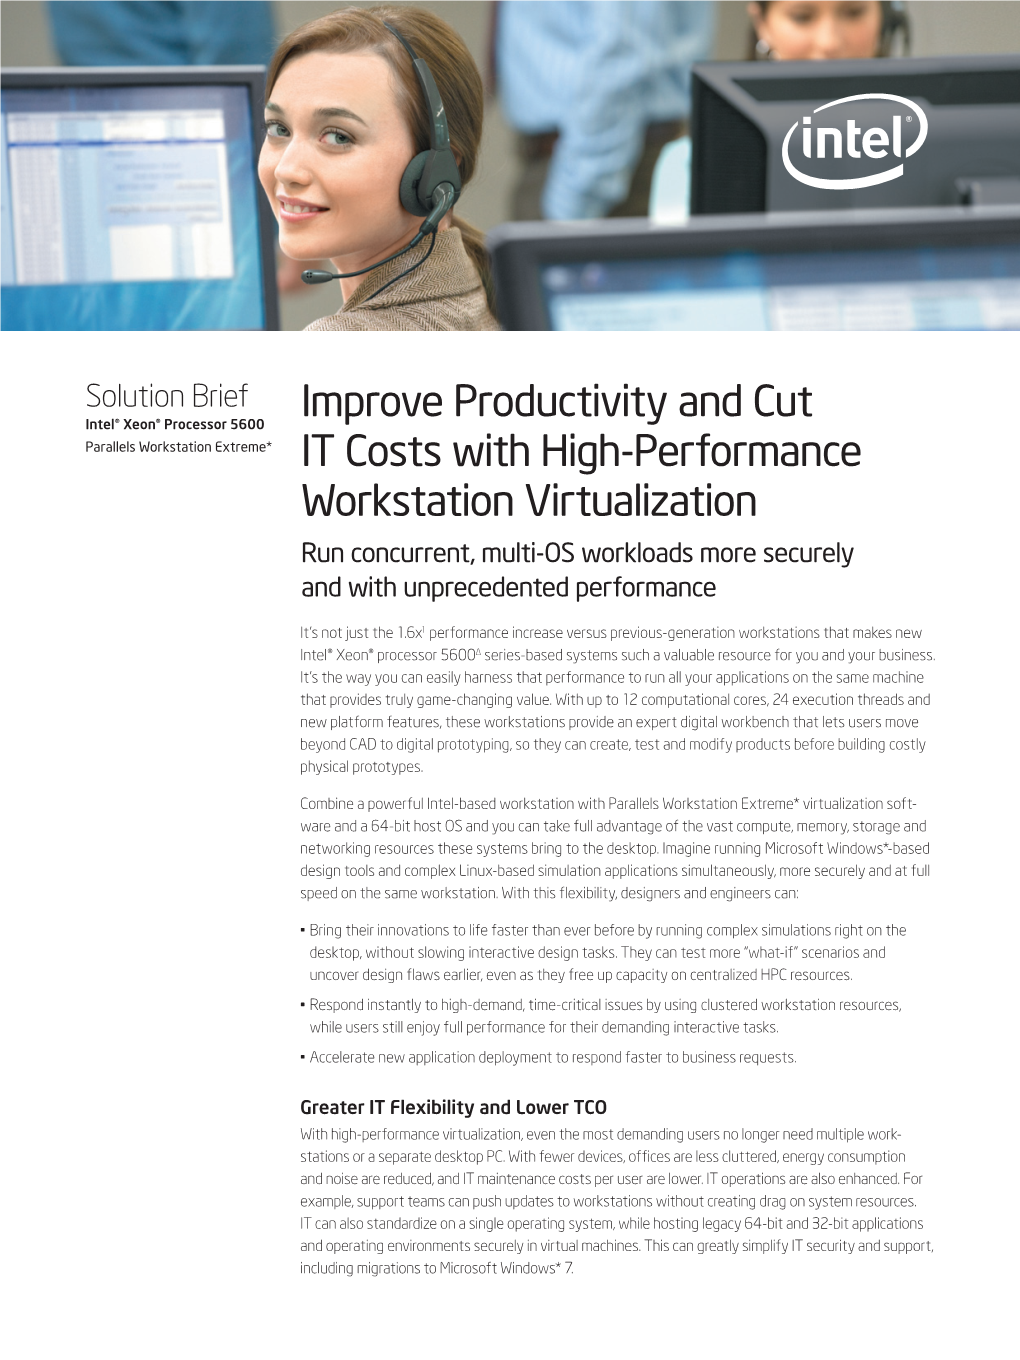 Improve Productivity and Cut IT Costs with High-Performance Workstation Virtualization